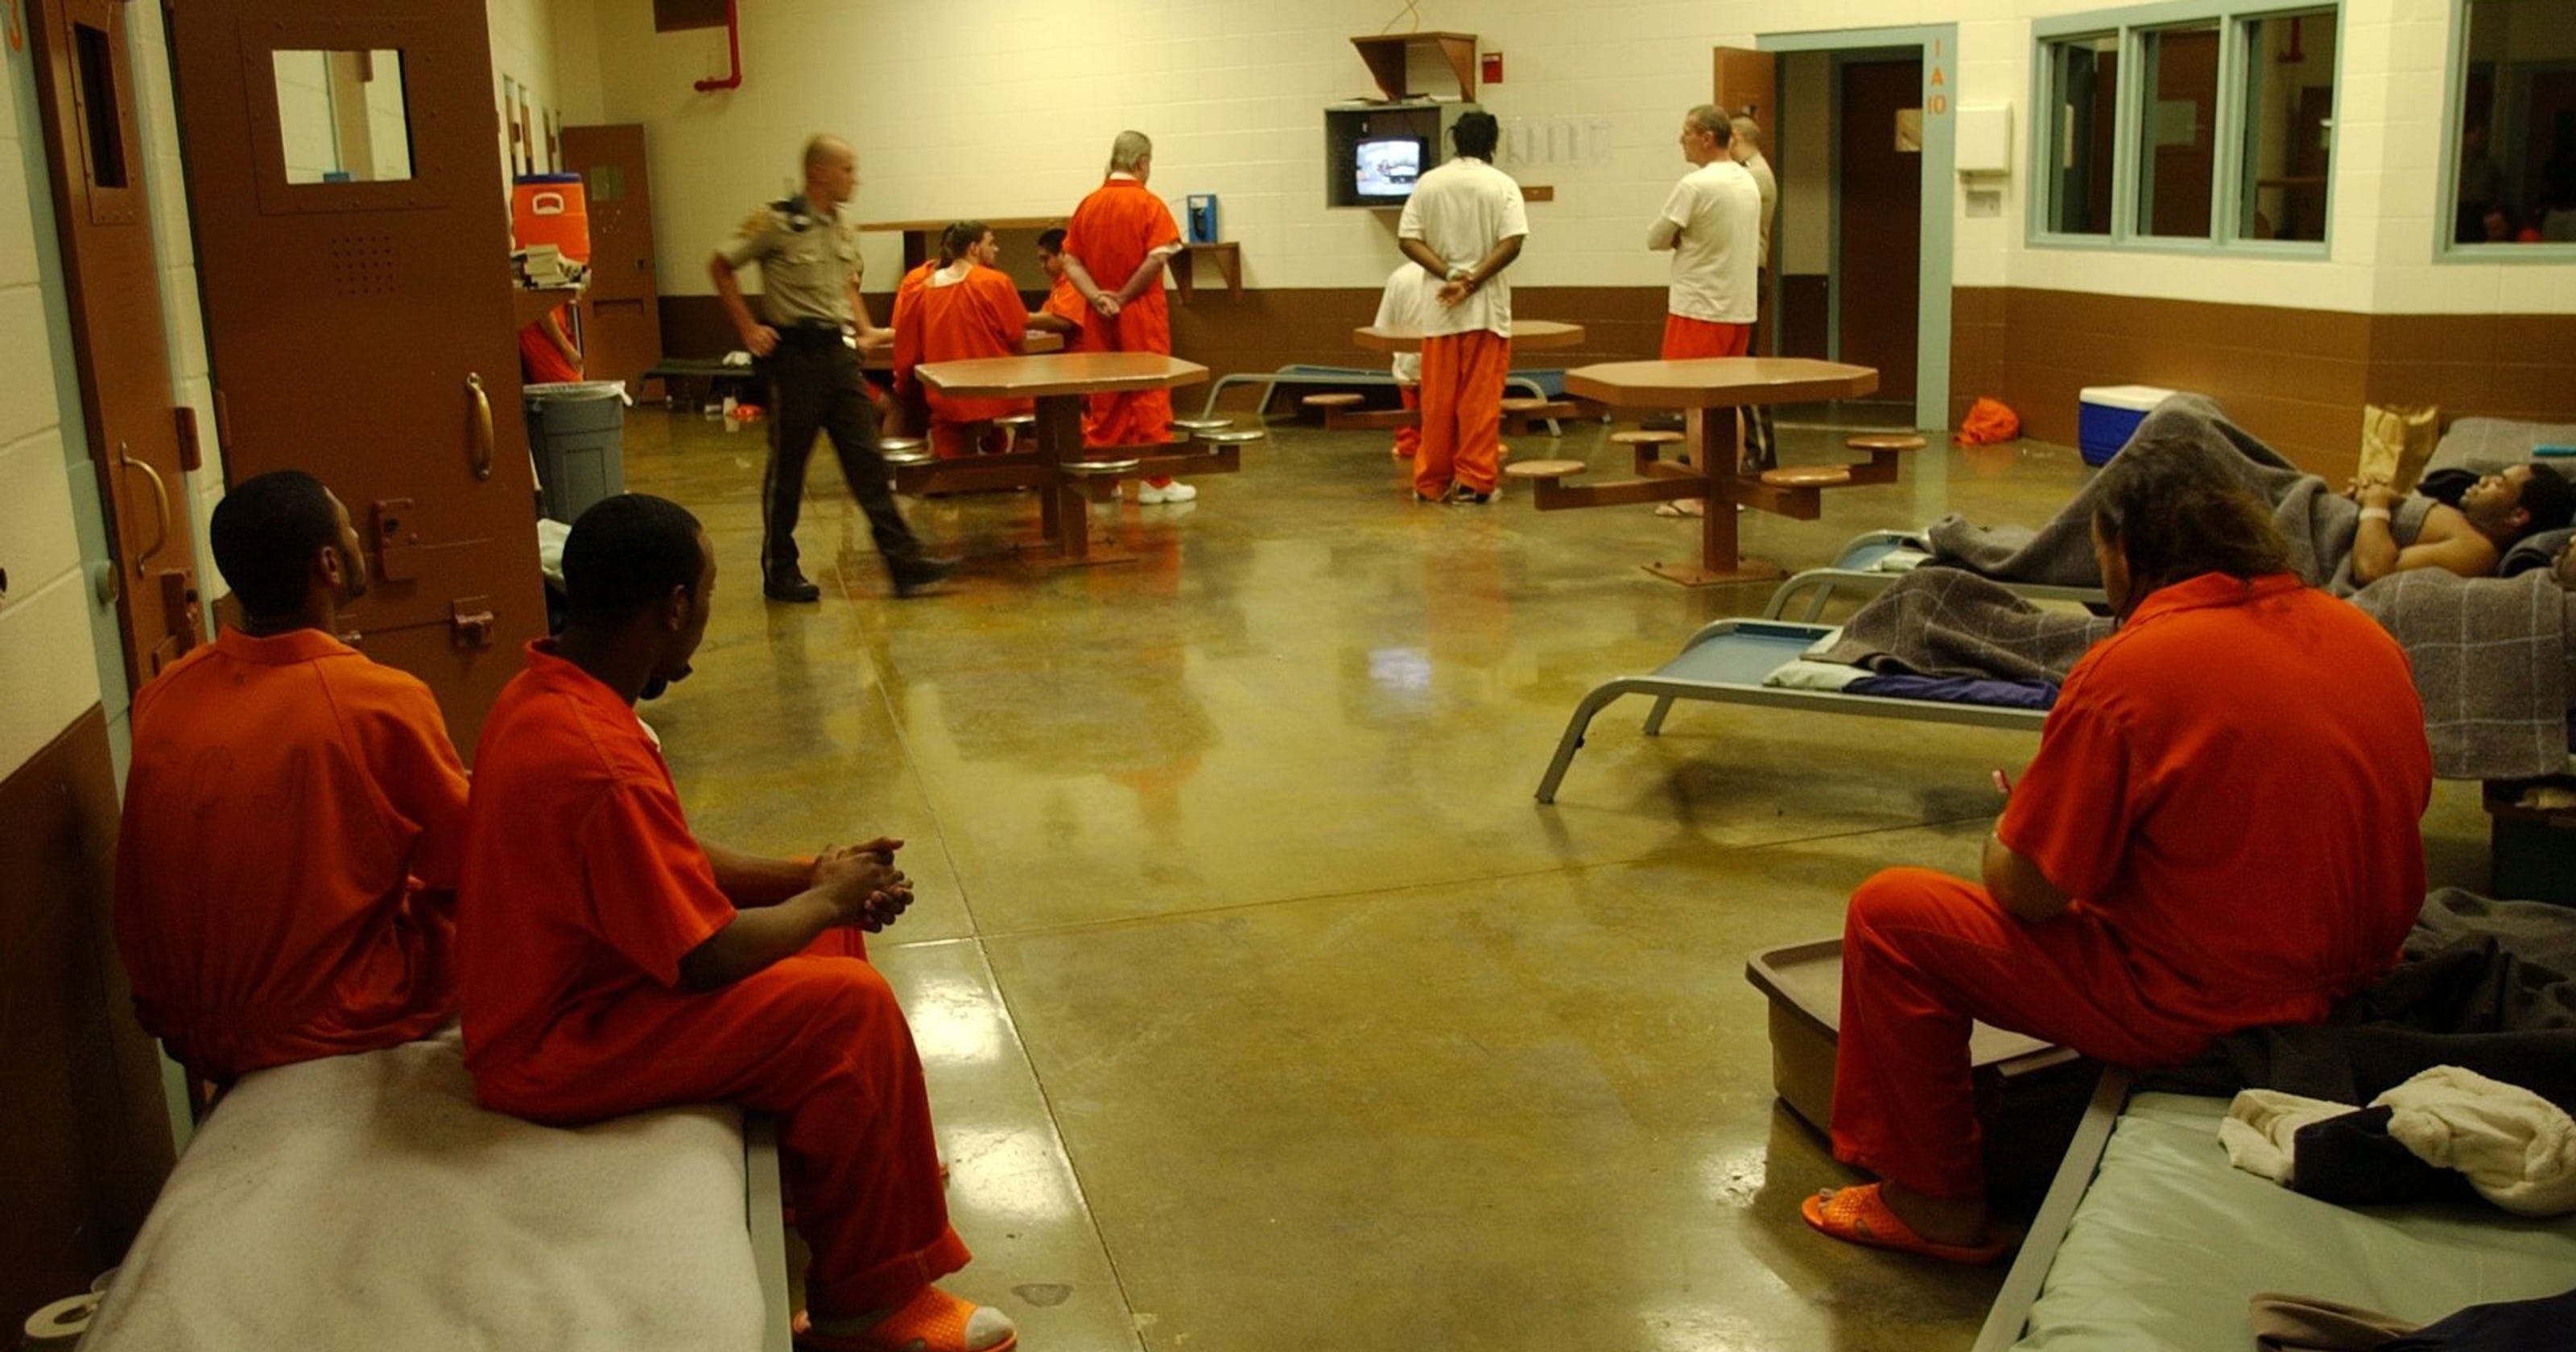 6 Disturbing Prison Facts You’ll Learn From Wild Docuseries ’60 Days In’